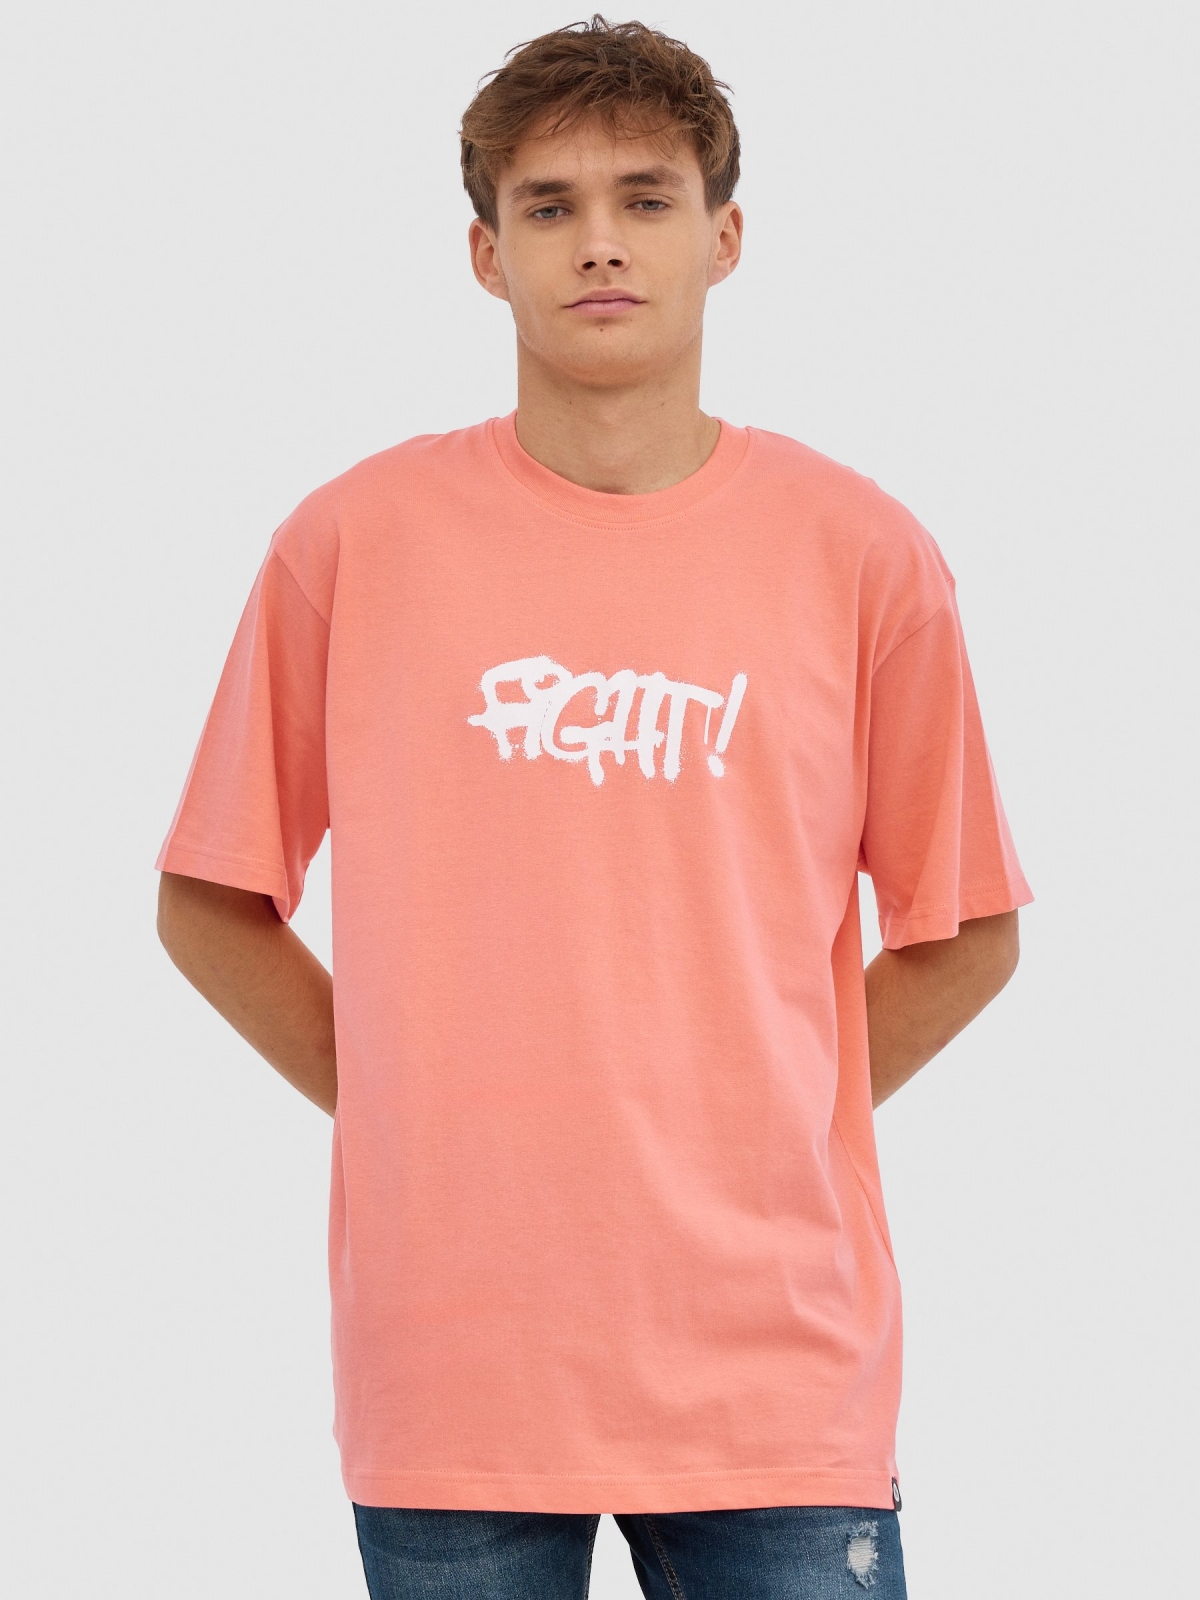 Fight! T-shirt pink middle front view